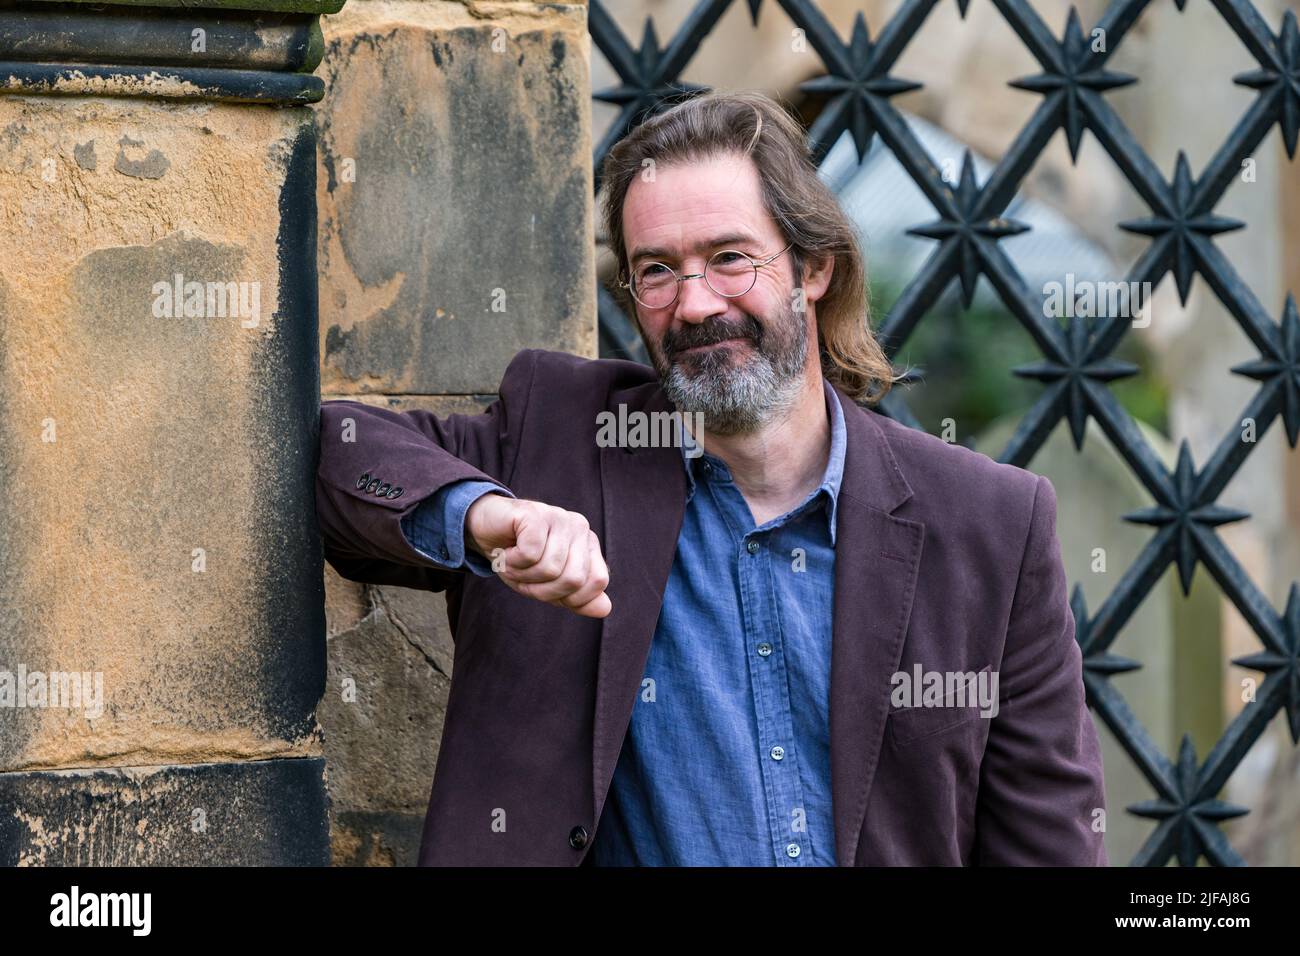 Scottish crime writer author James Oswald in South Leith Parish Church graveyard by an ornate grille in a mausoleum, Edinburgh, Scotland, UK Stock Photo